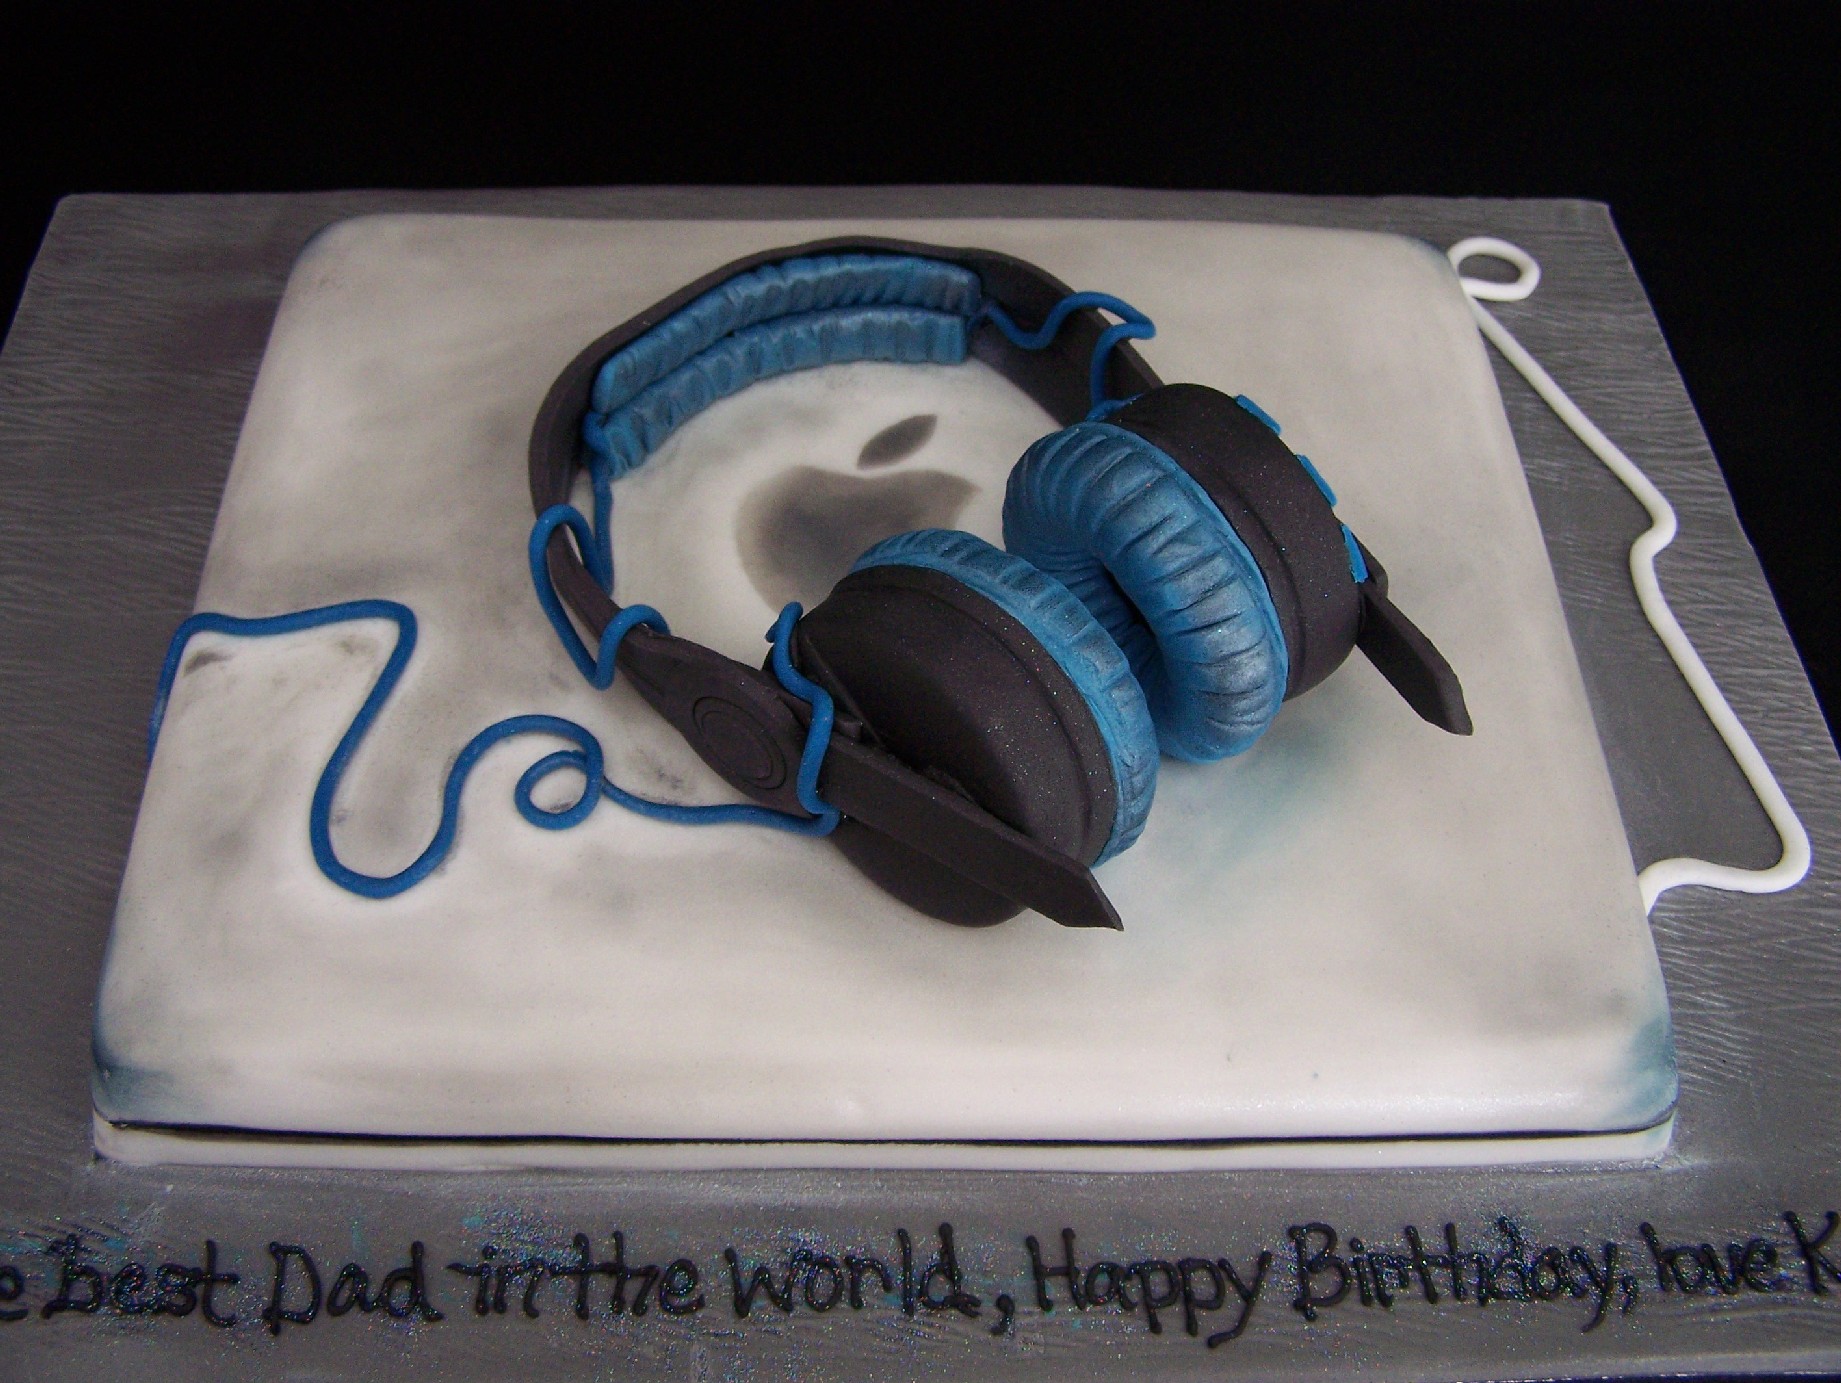 Headphones and Laptop Cake | Novelty Cakes